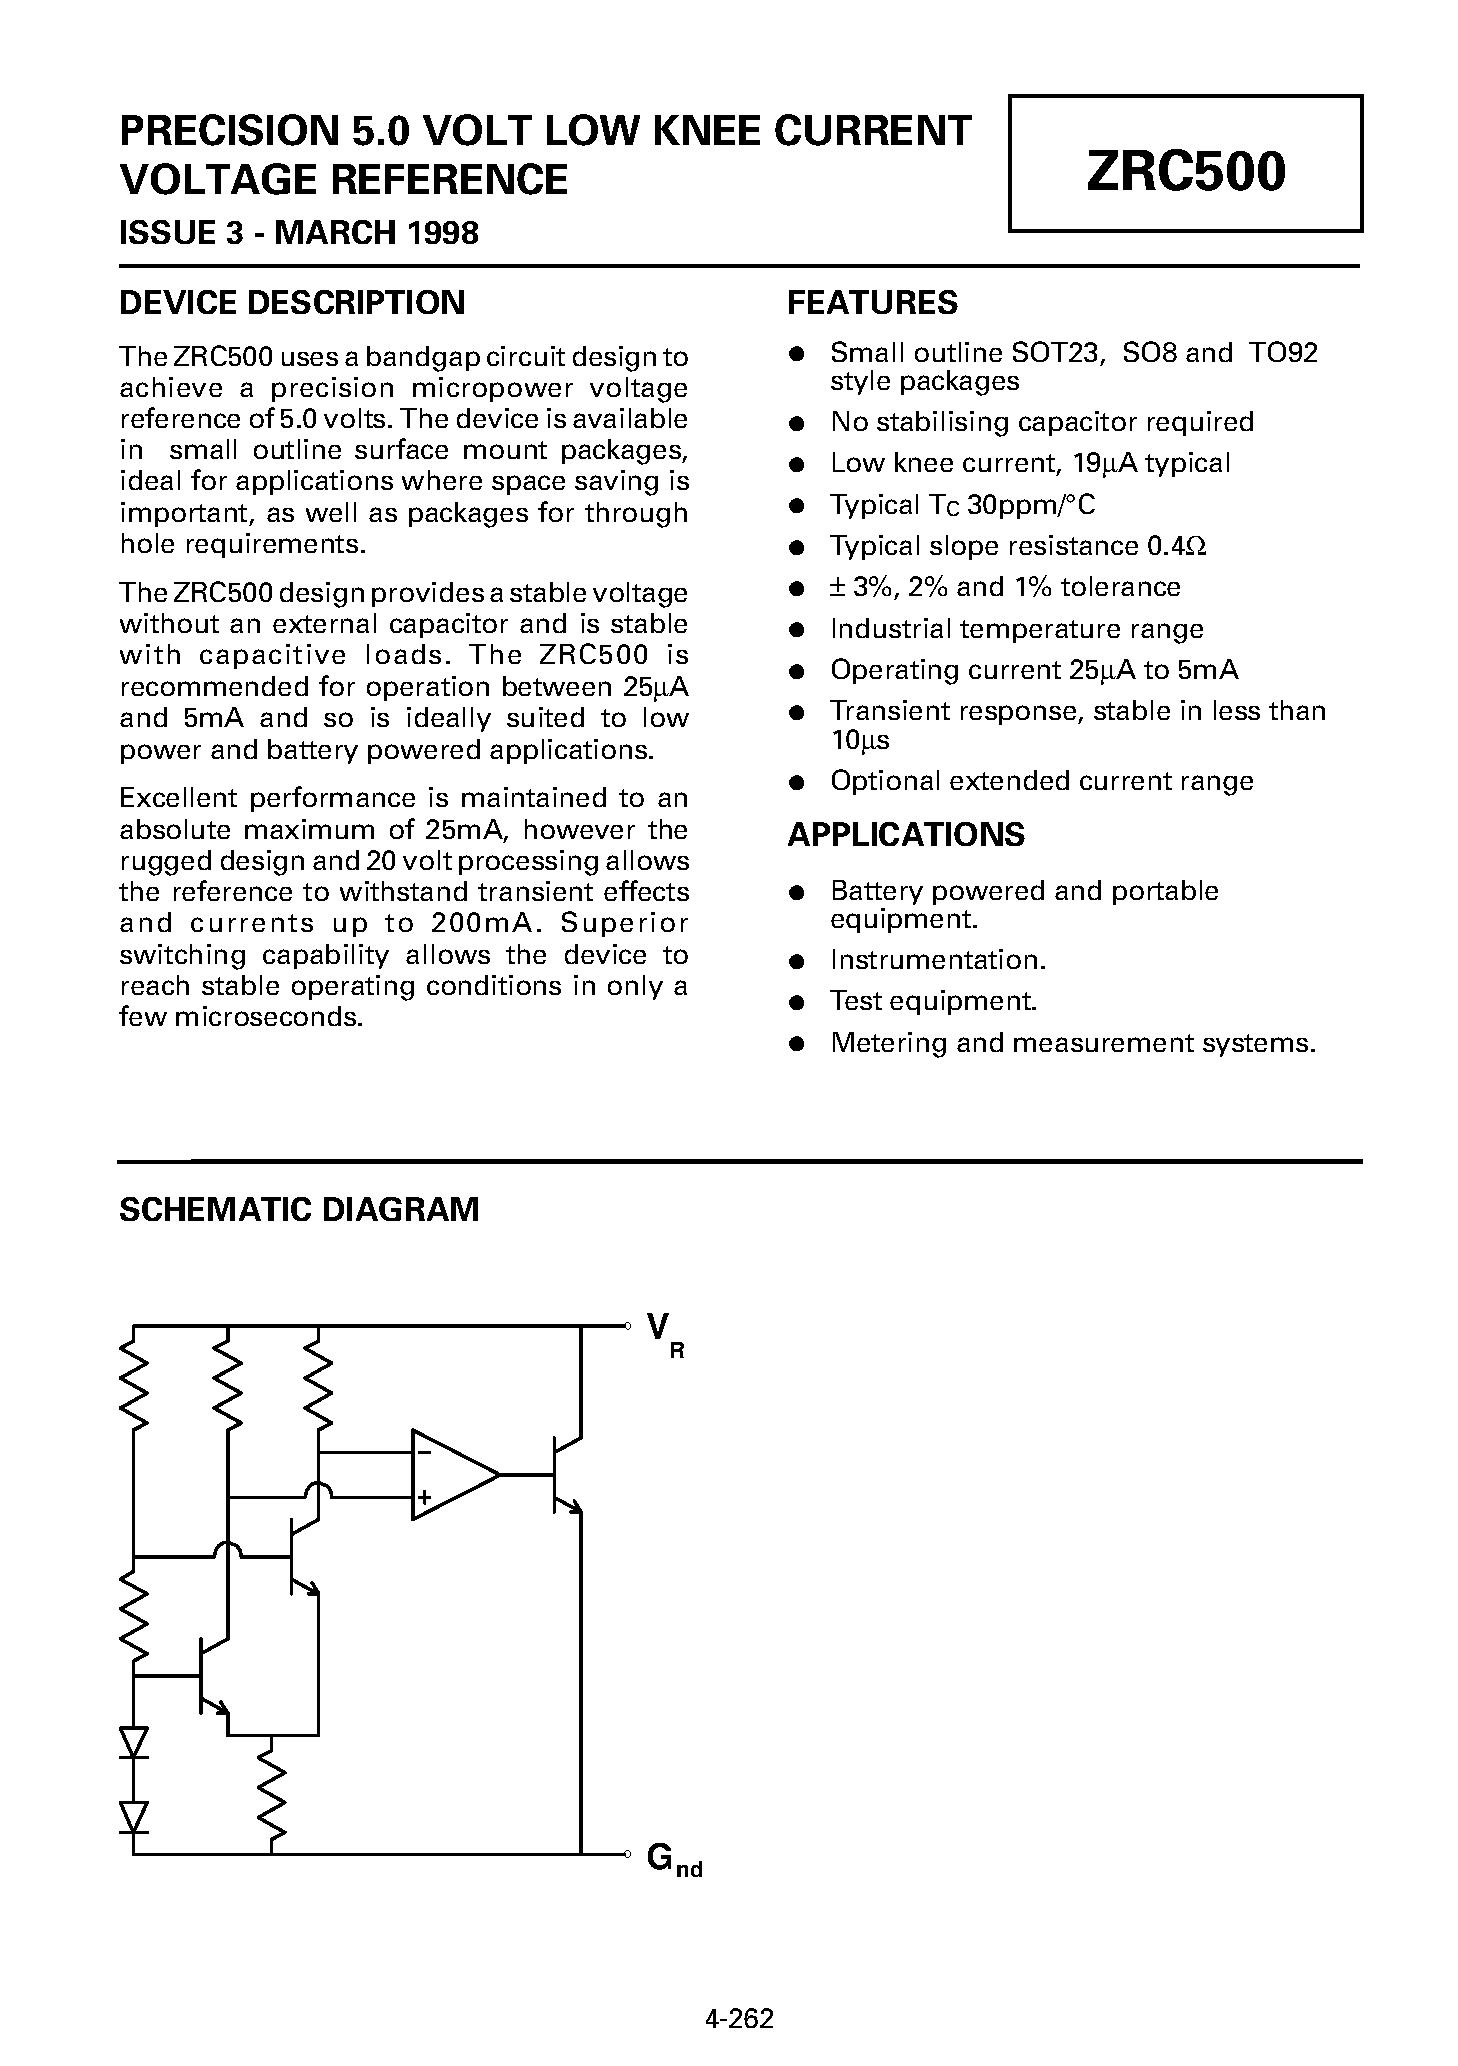 Datasheet ZRC500F01 - PRECISION 5.0 VOLT LOW KNEE CURRENT VOLTAGE REFERENCE page 1